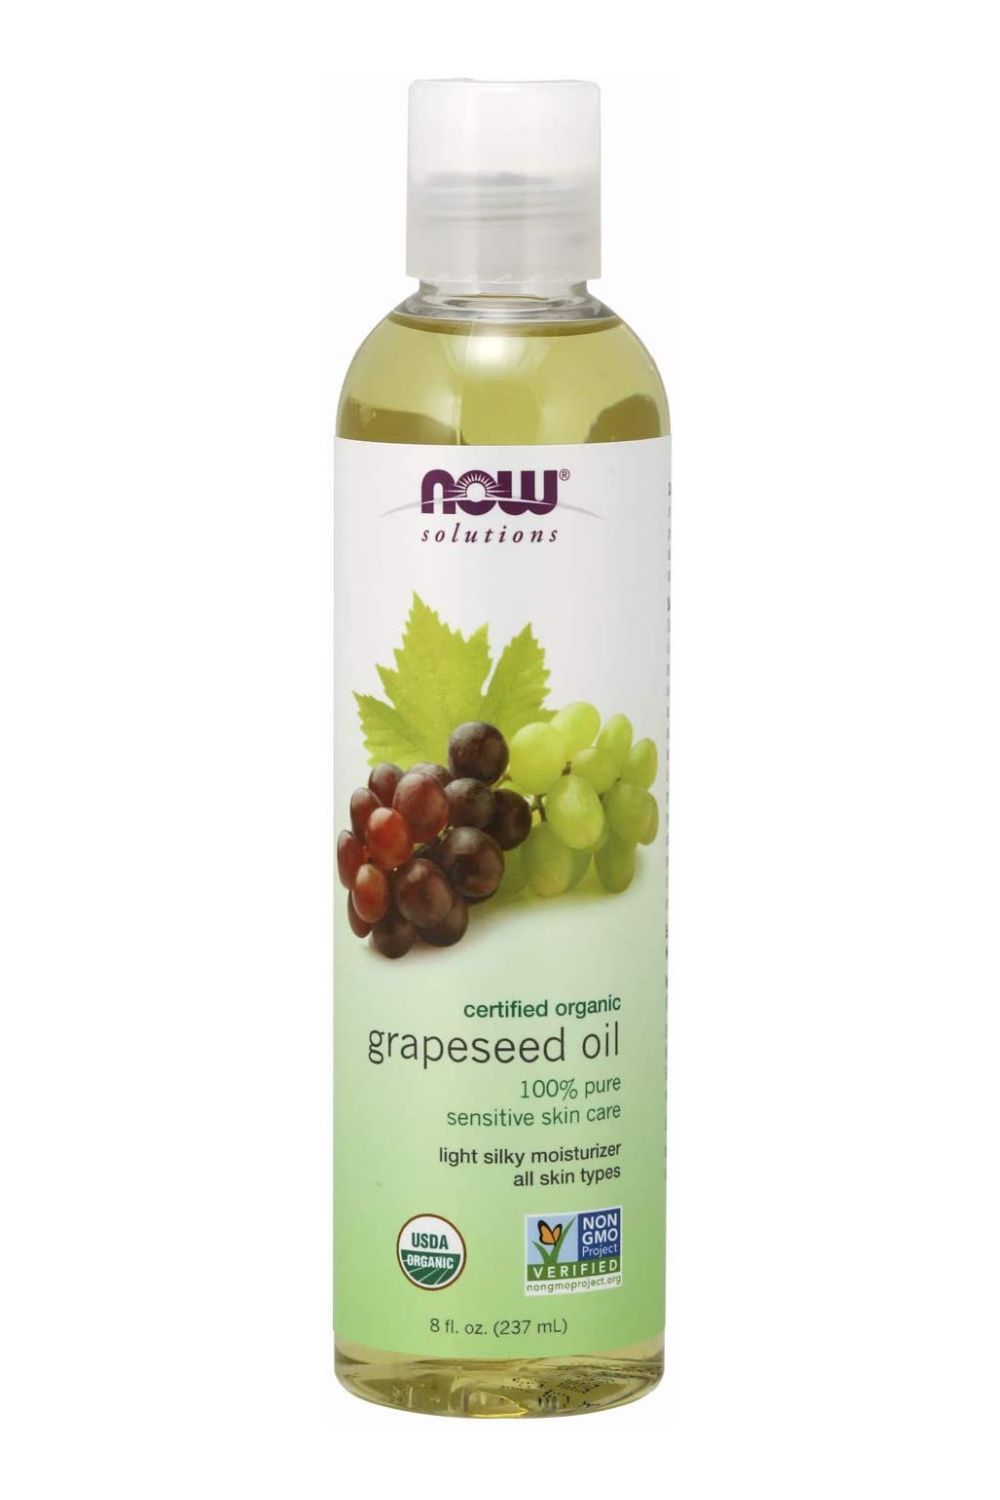 5 Ways to Use Grapeseed Oil for Hair Condition Moisturize and Fight Frizz